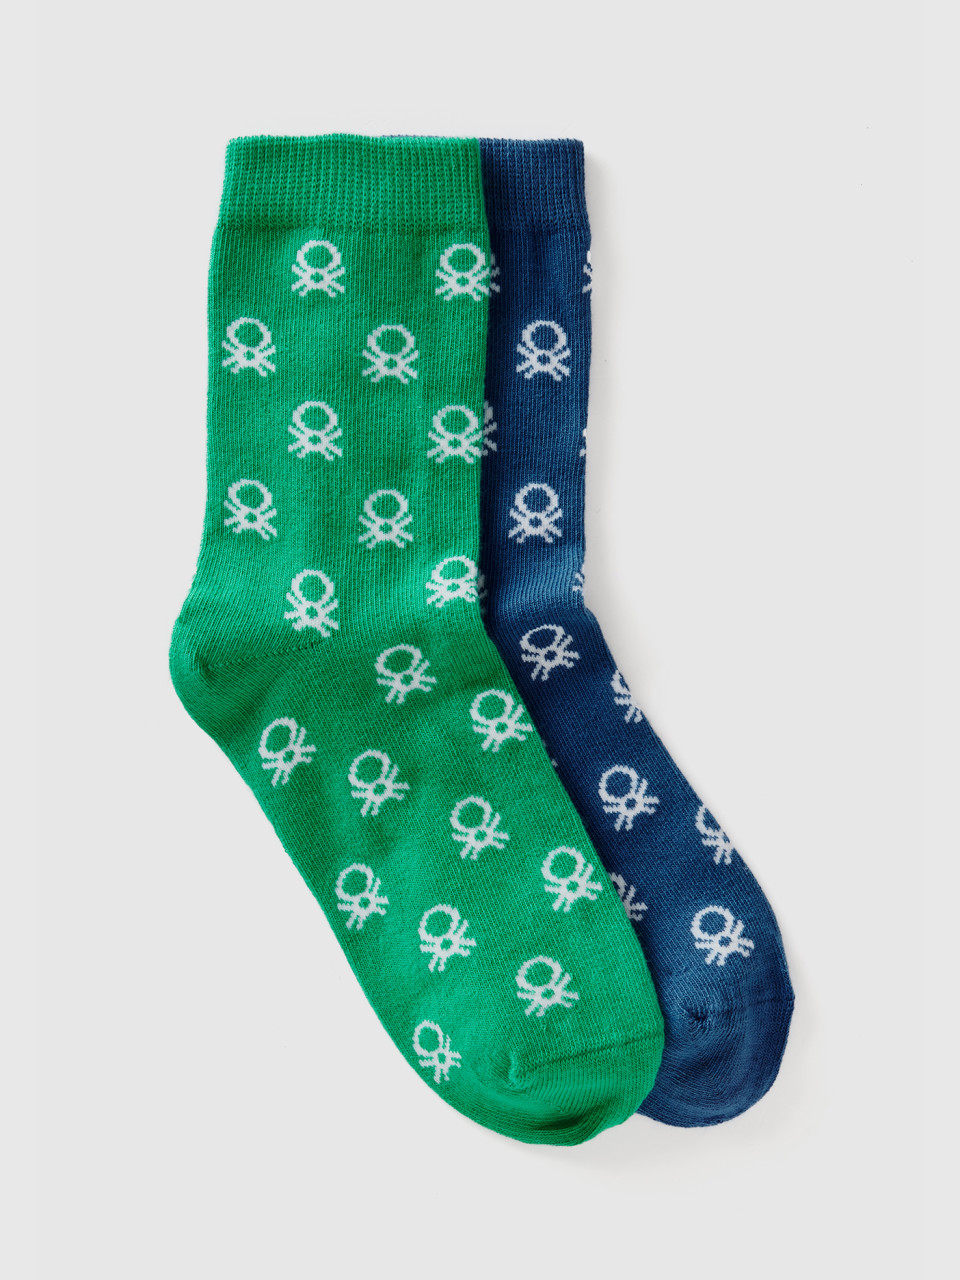 Benetton, Two Pairs Of Long Green And Blue Socks, Multi-color, Kids